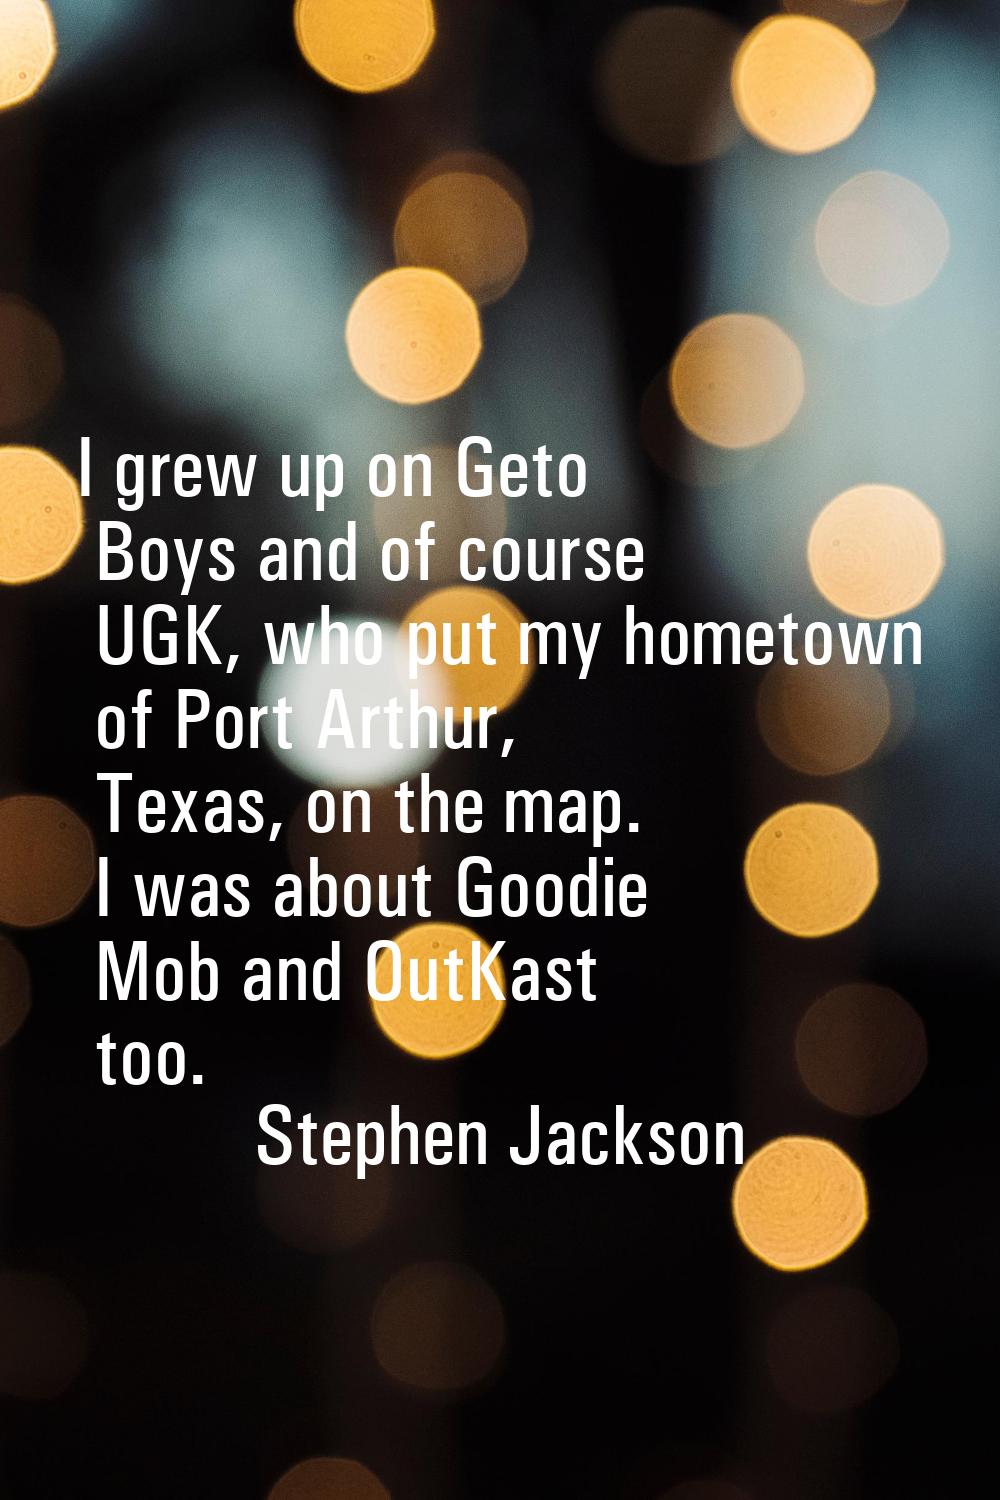 I grew up on Geto Boys and of course UGK, who put my hometown of Port Arthur, Texas, on the map. I 